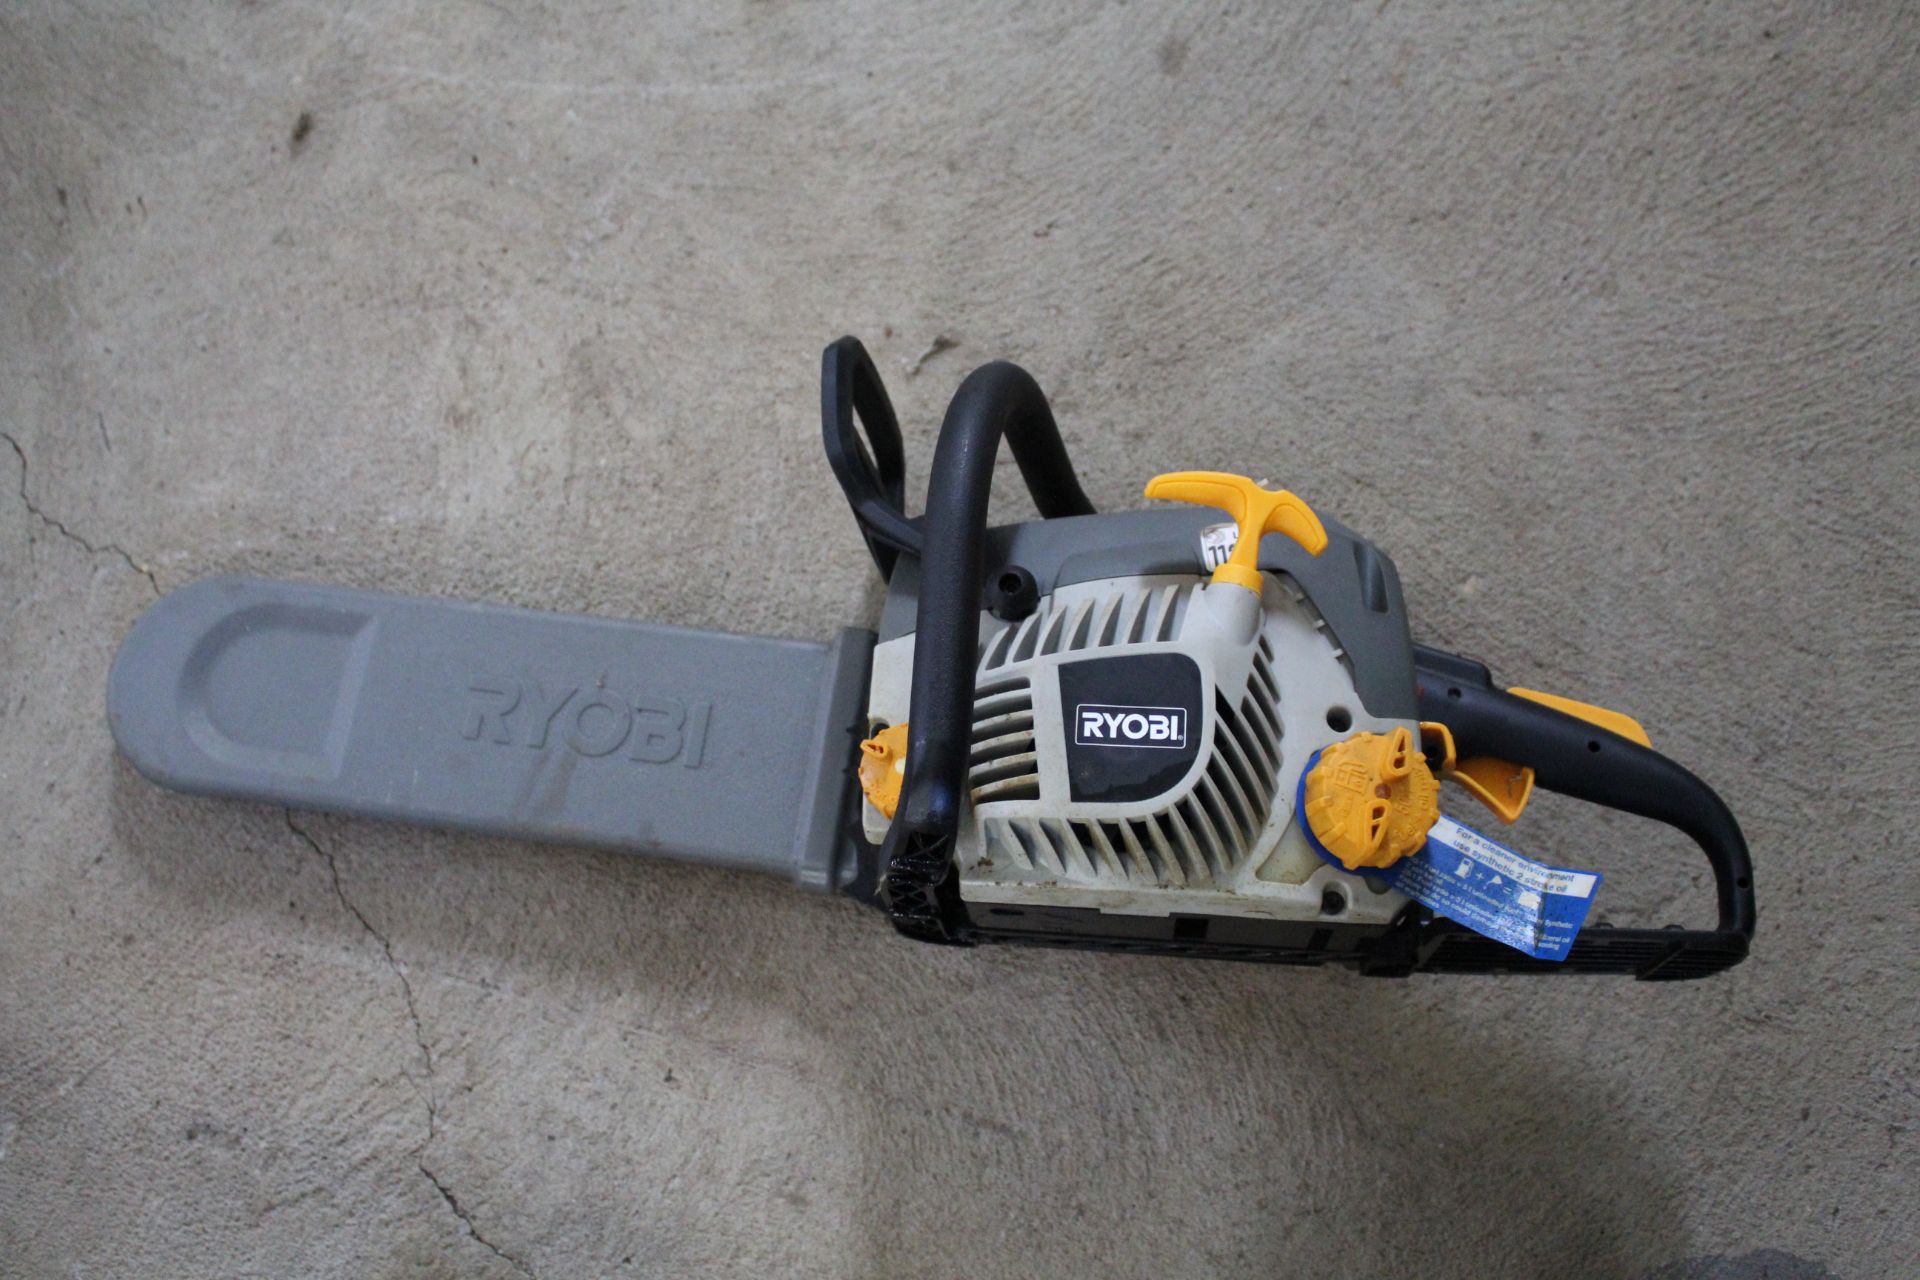 Ryobi petrol chainsaw and case. - Image 2 of 6